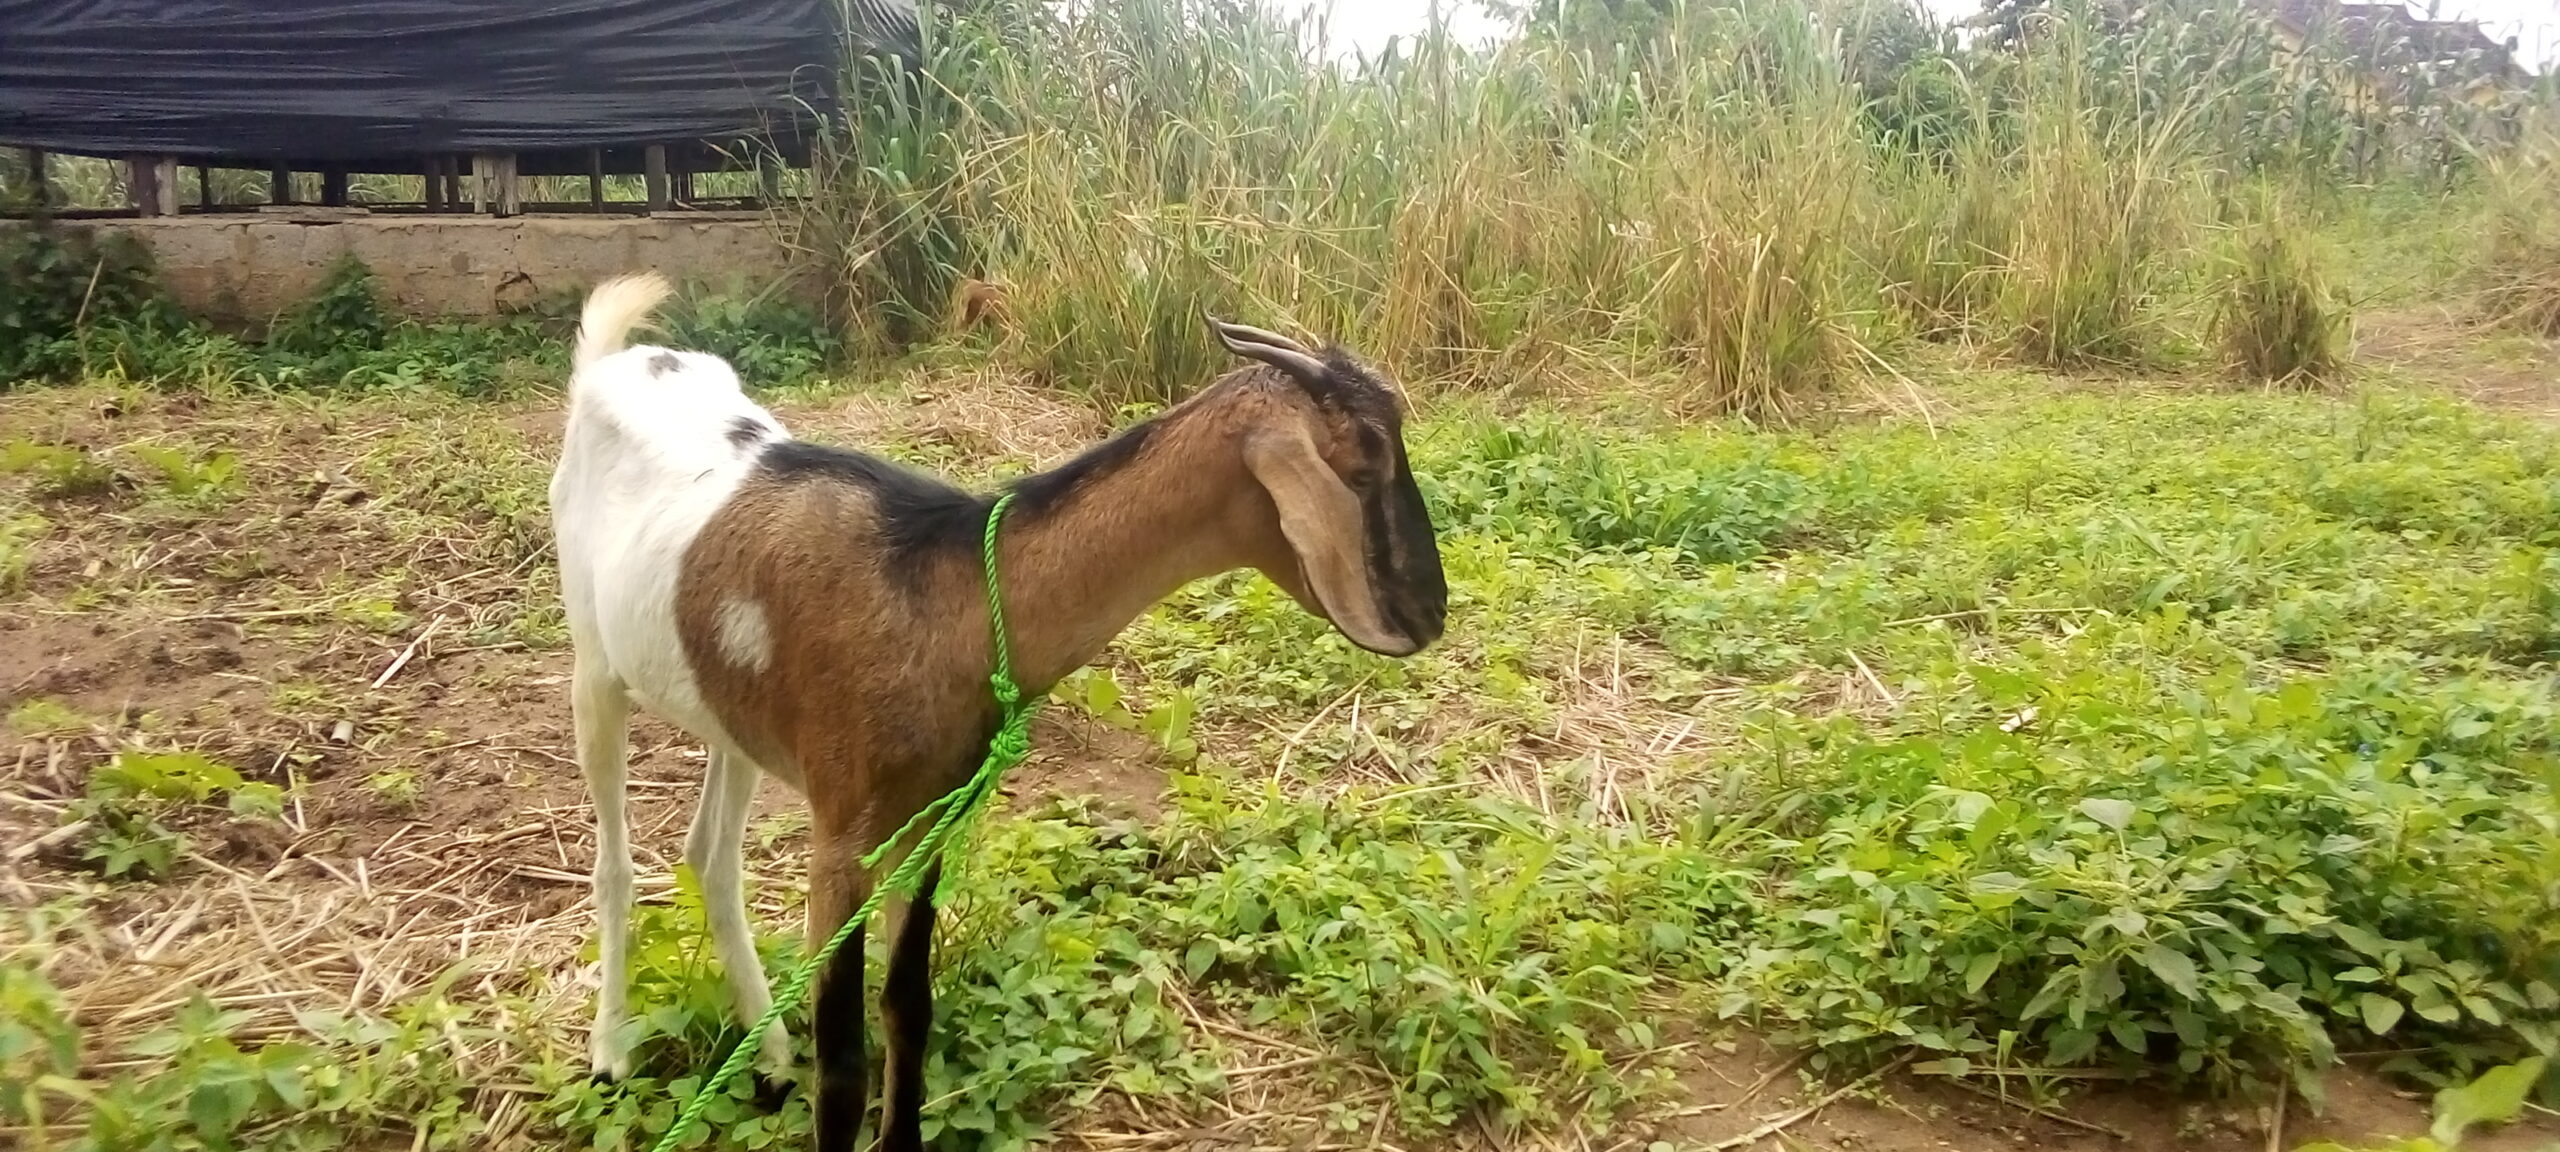 Cost of starting commercial Goat Farming in Nigeria 2022